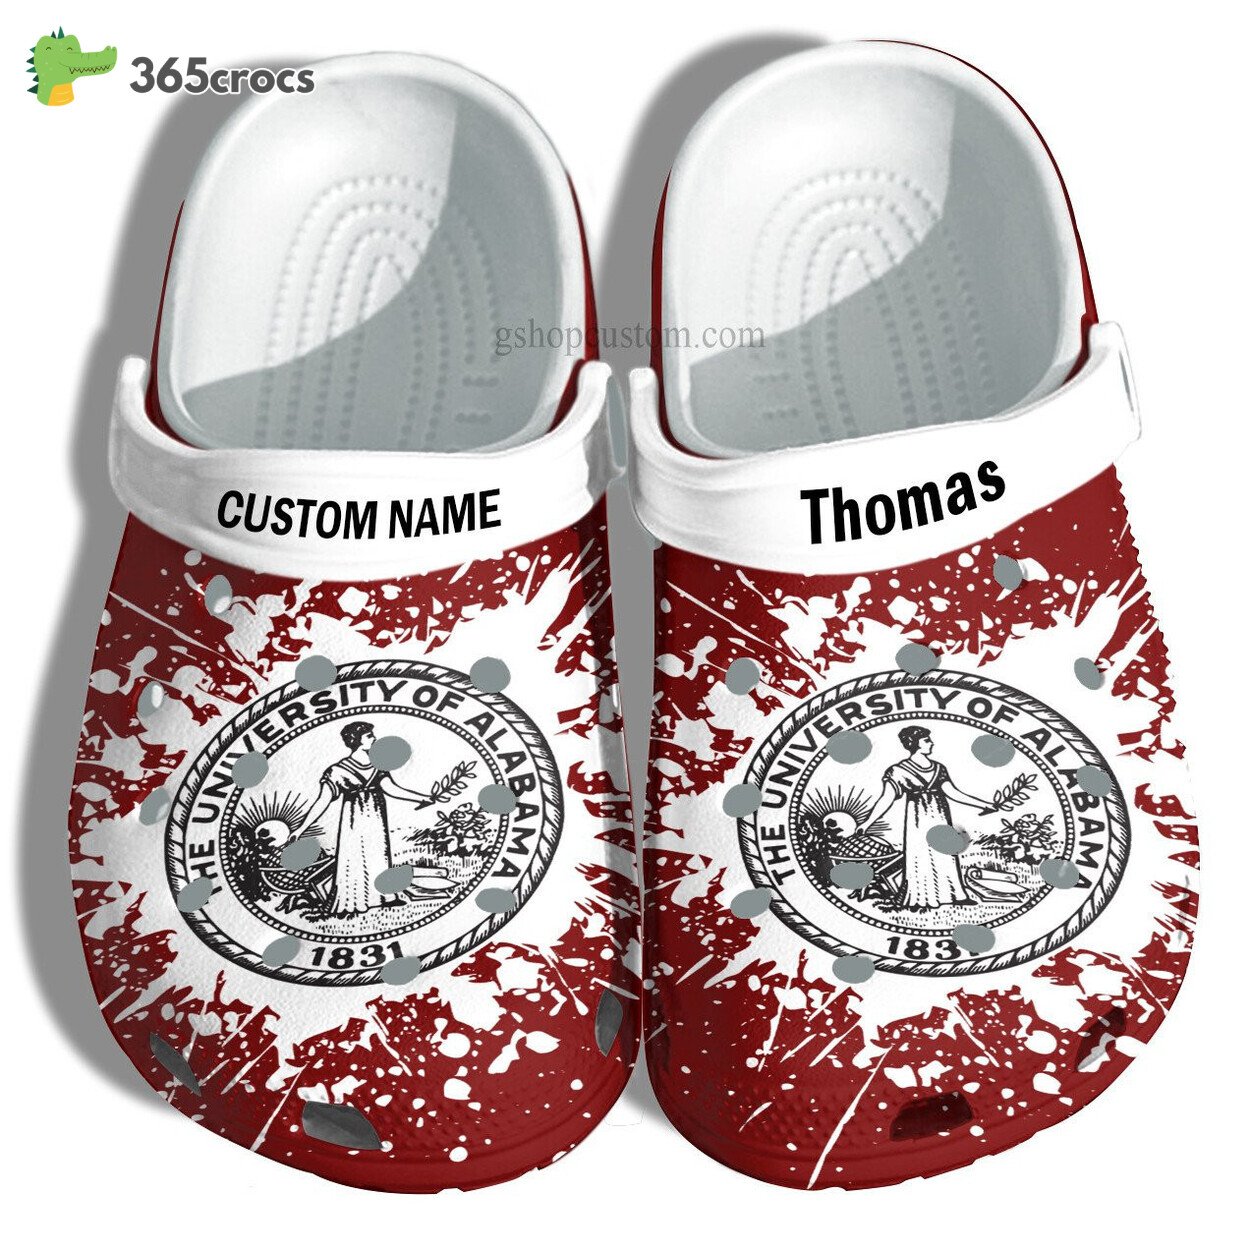 The University Of Alabama Graduation Gifts Croc Shoes Customize Admission Gift Shoes